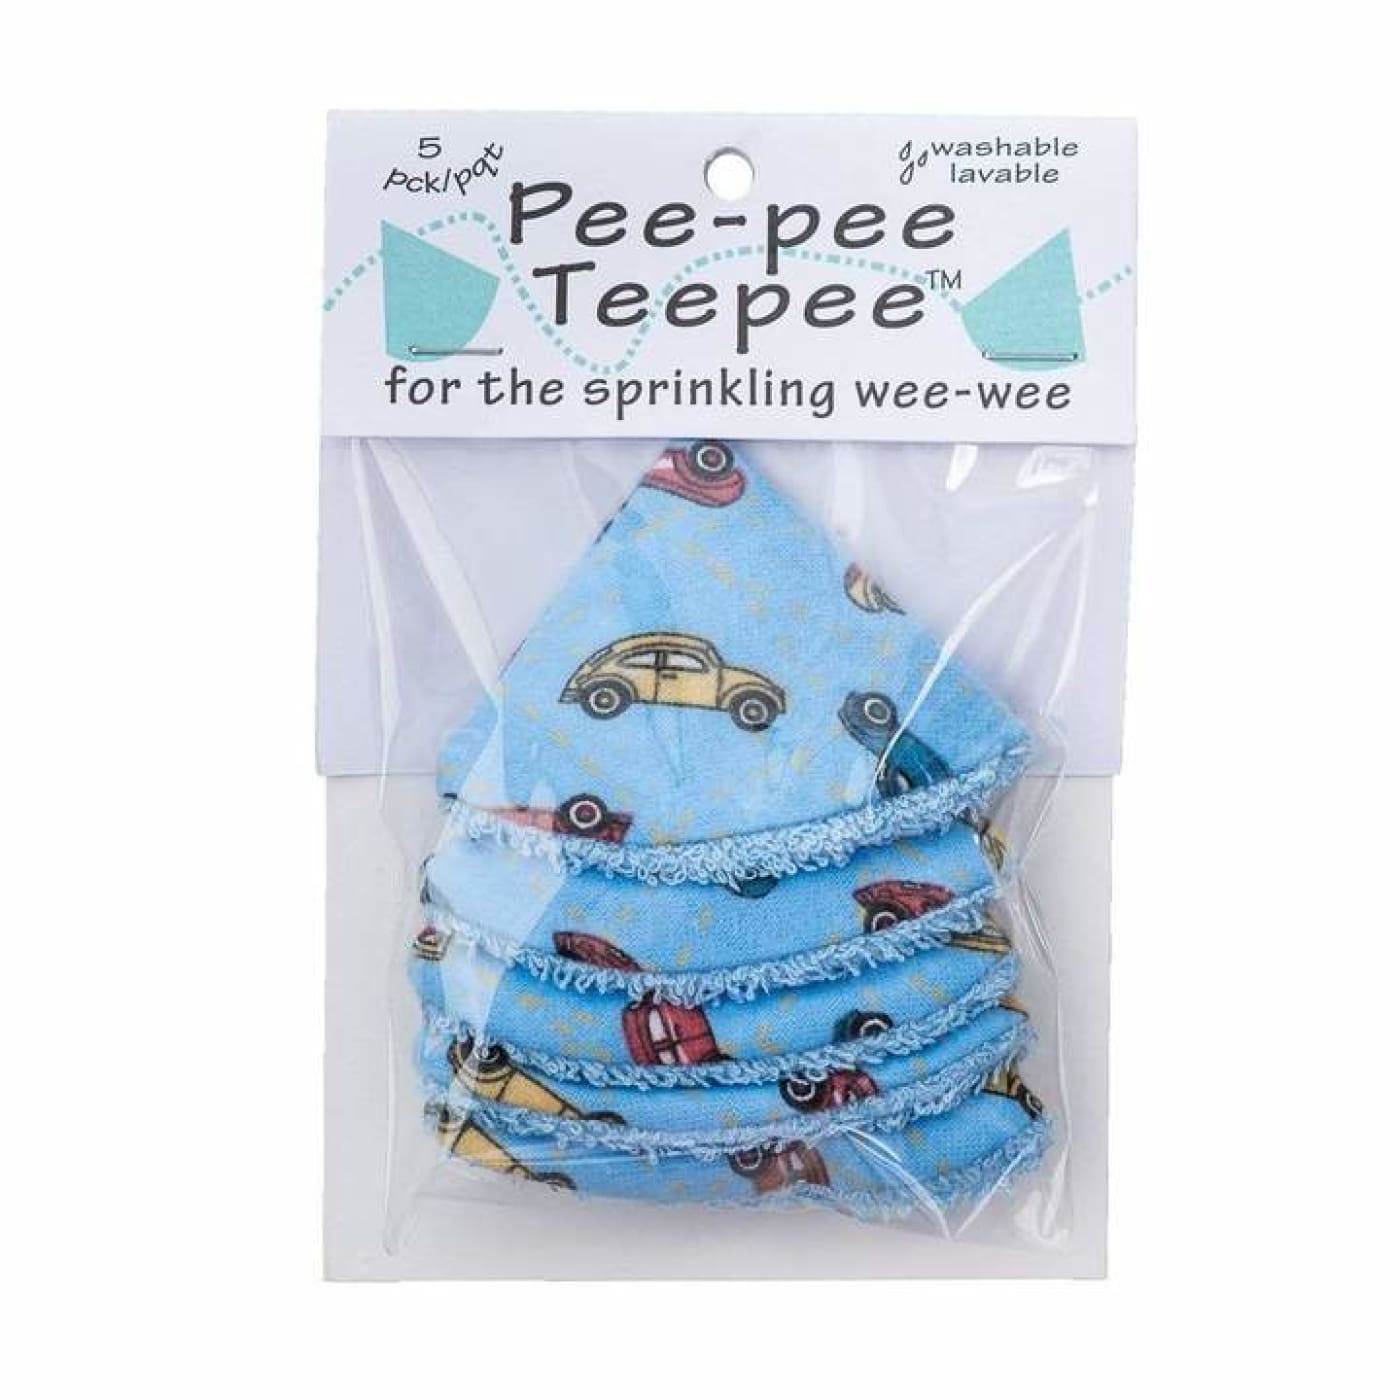 Pee-pee Teepee - Cars - Cars - BATHTIME & CHANGING - NAPPIES/WIPES/ACCESSORIES